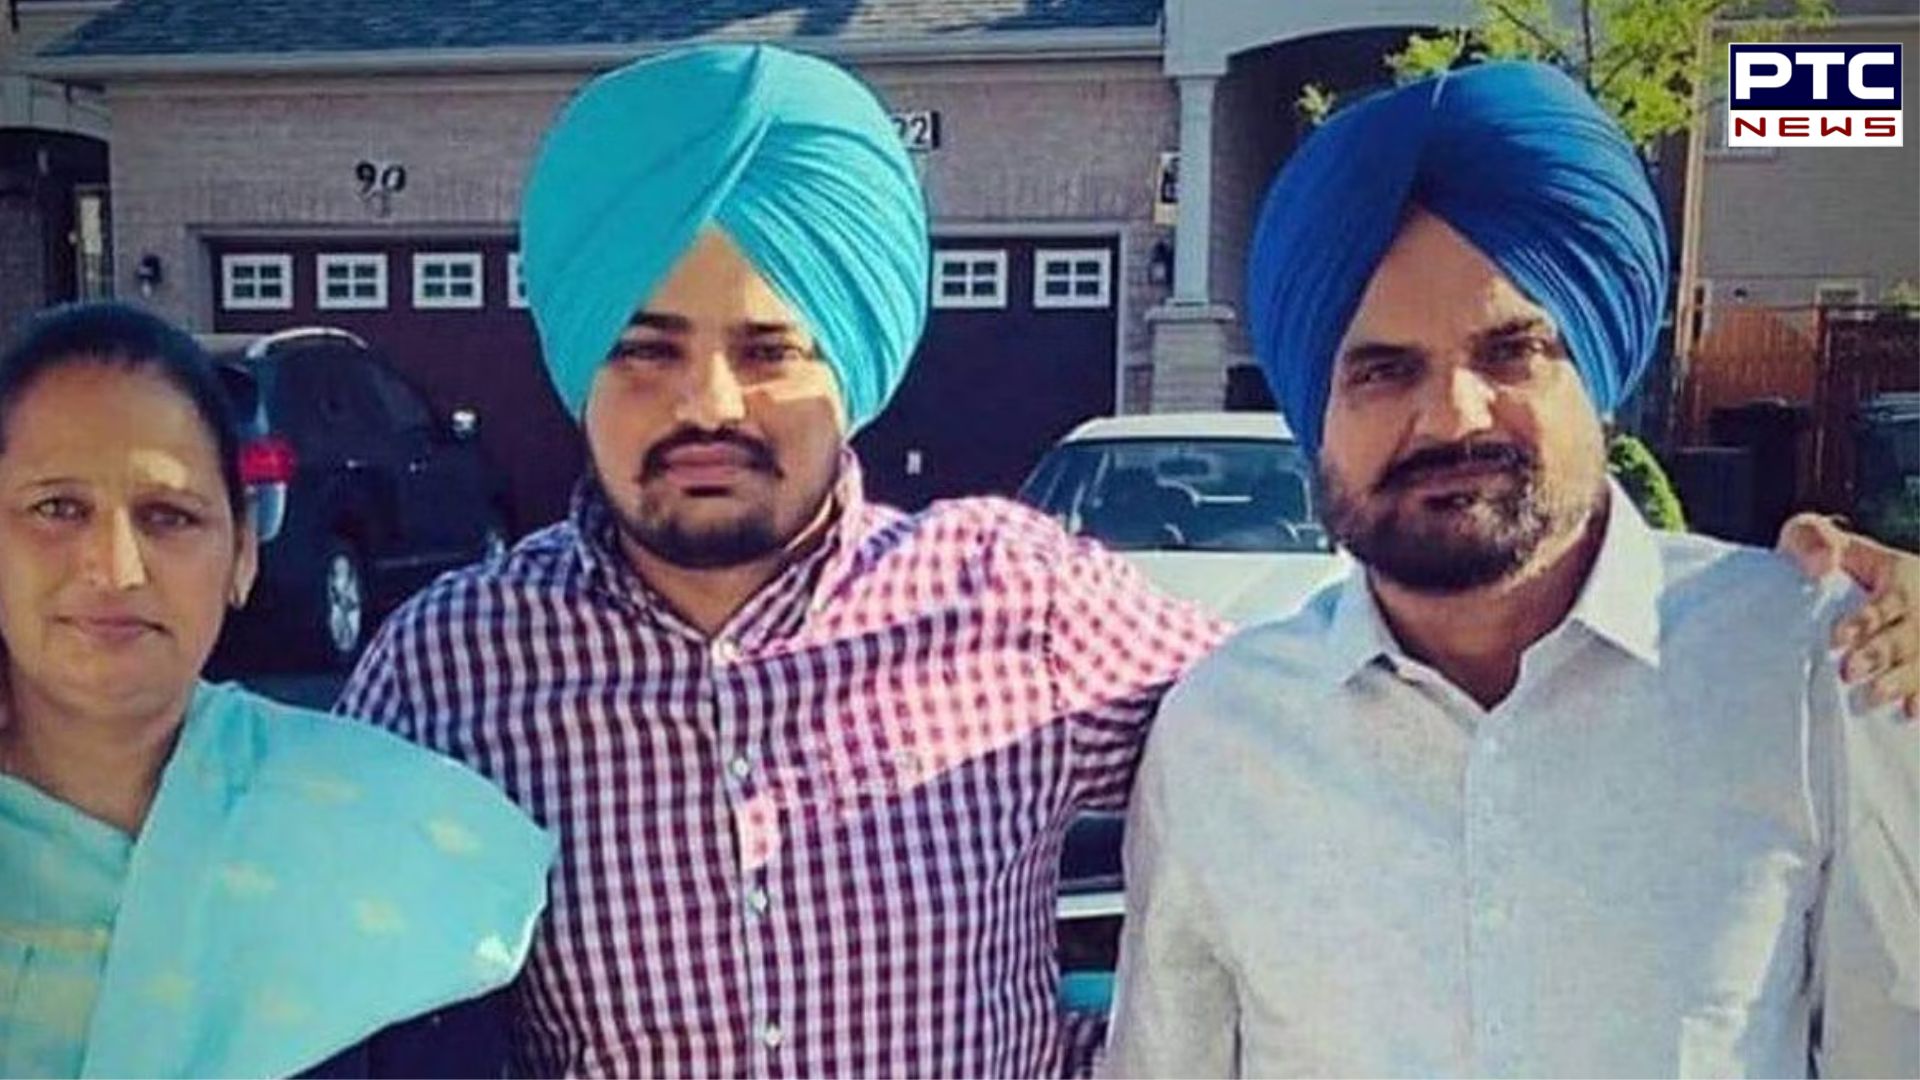 Sidhu Moosewala's parents 'embrace IVF miracle': What is it all about? Read in Detail